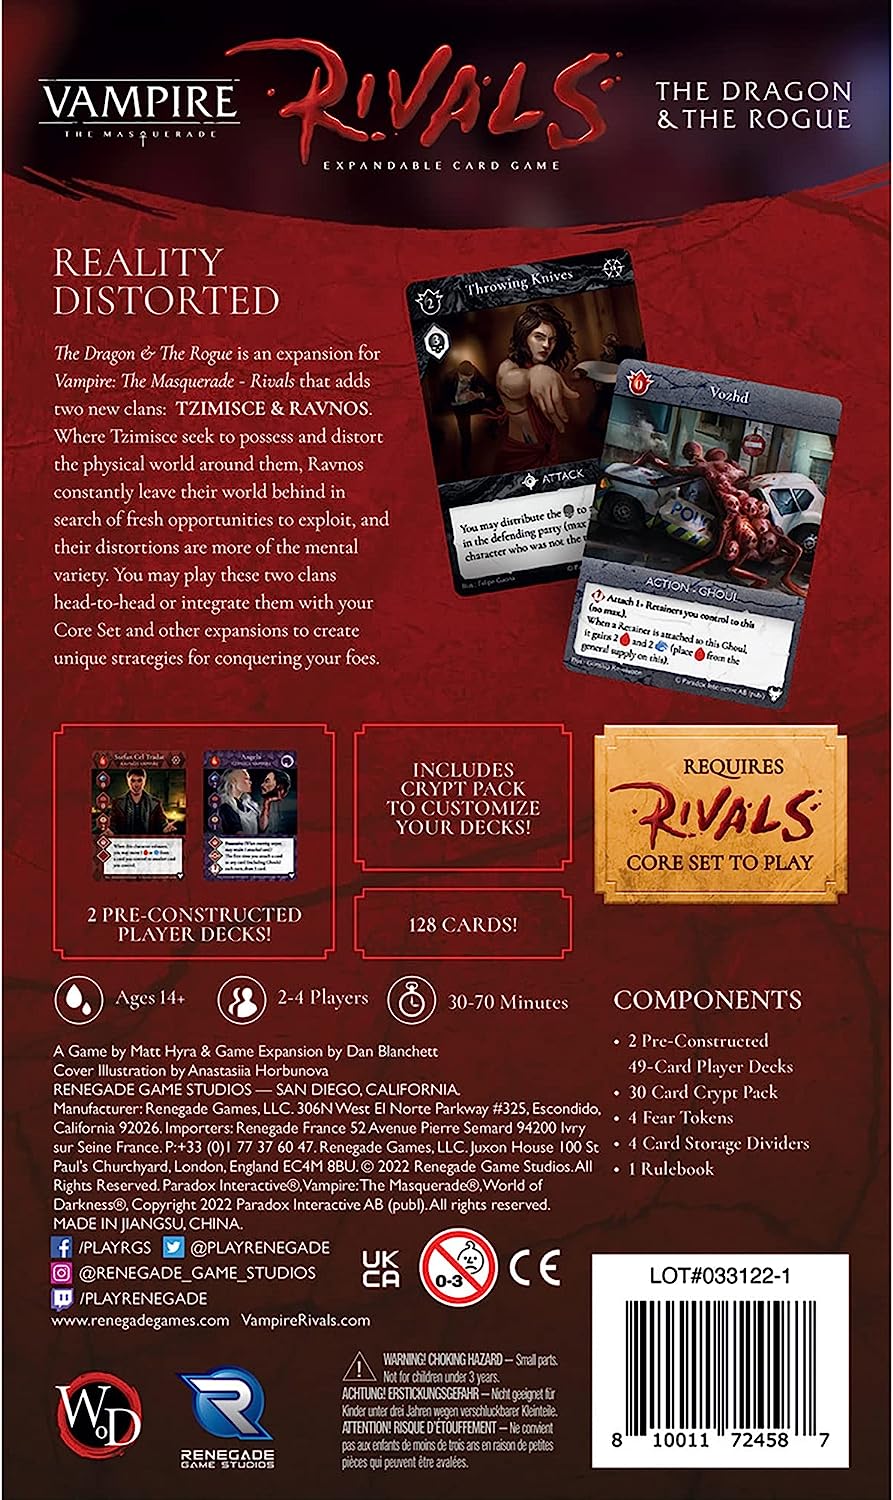 Vampire: The Masquerade Rivals Expandable Card Game The Dragon & The Rogue Expansion - Ages 14+, 2-4 Players, 30-70 Min (RGS02458)